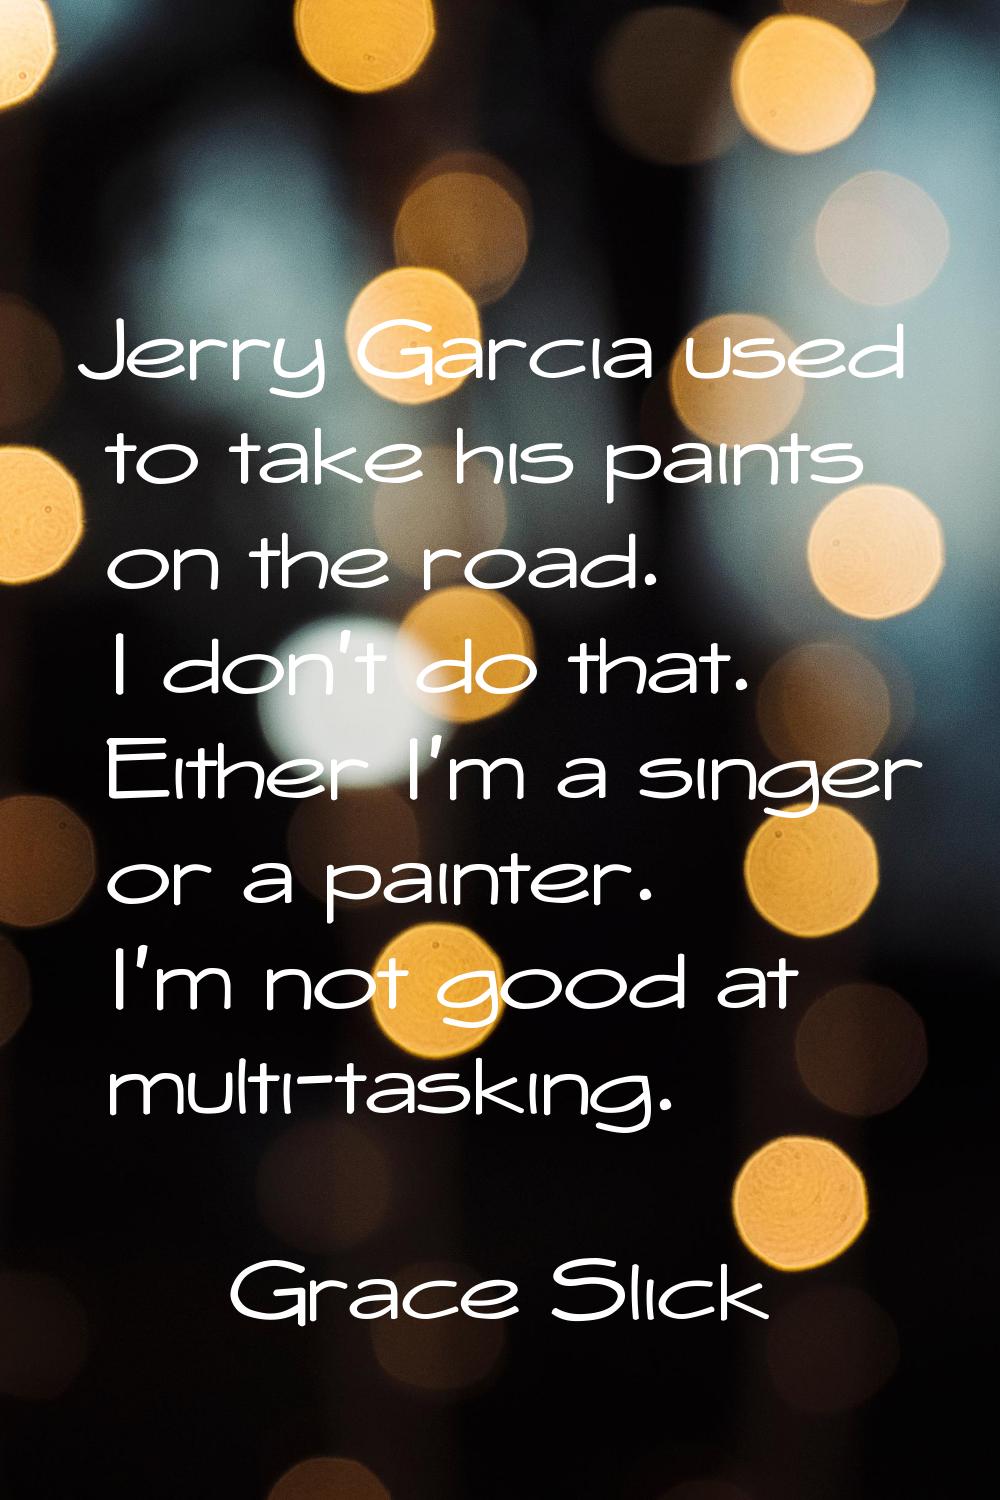 Jerry Garcia used to take his paints on the road. I don't do that. Either I'm a singer or a painter